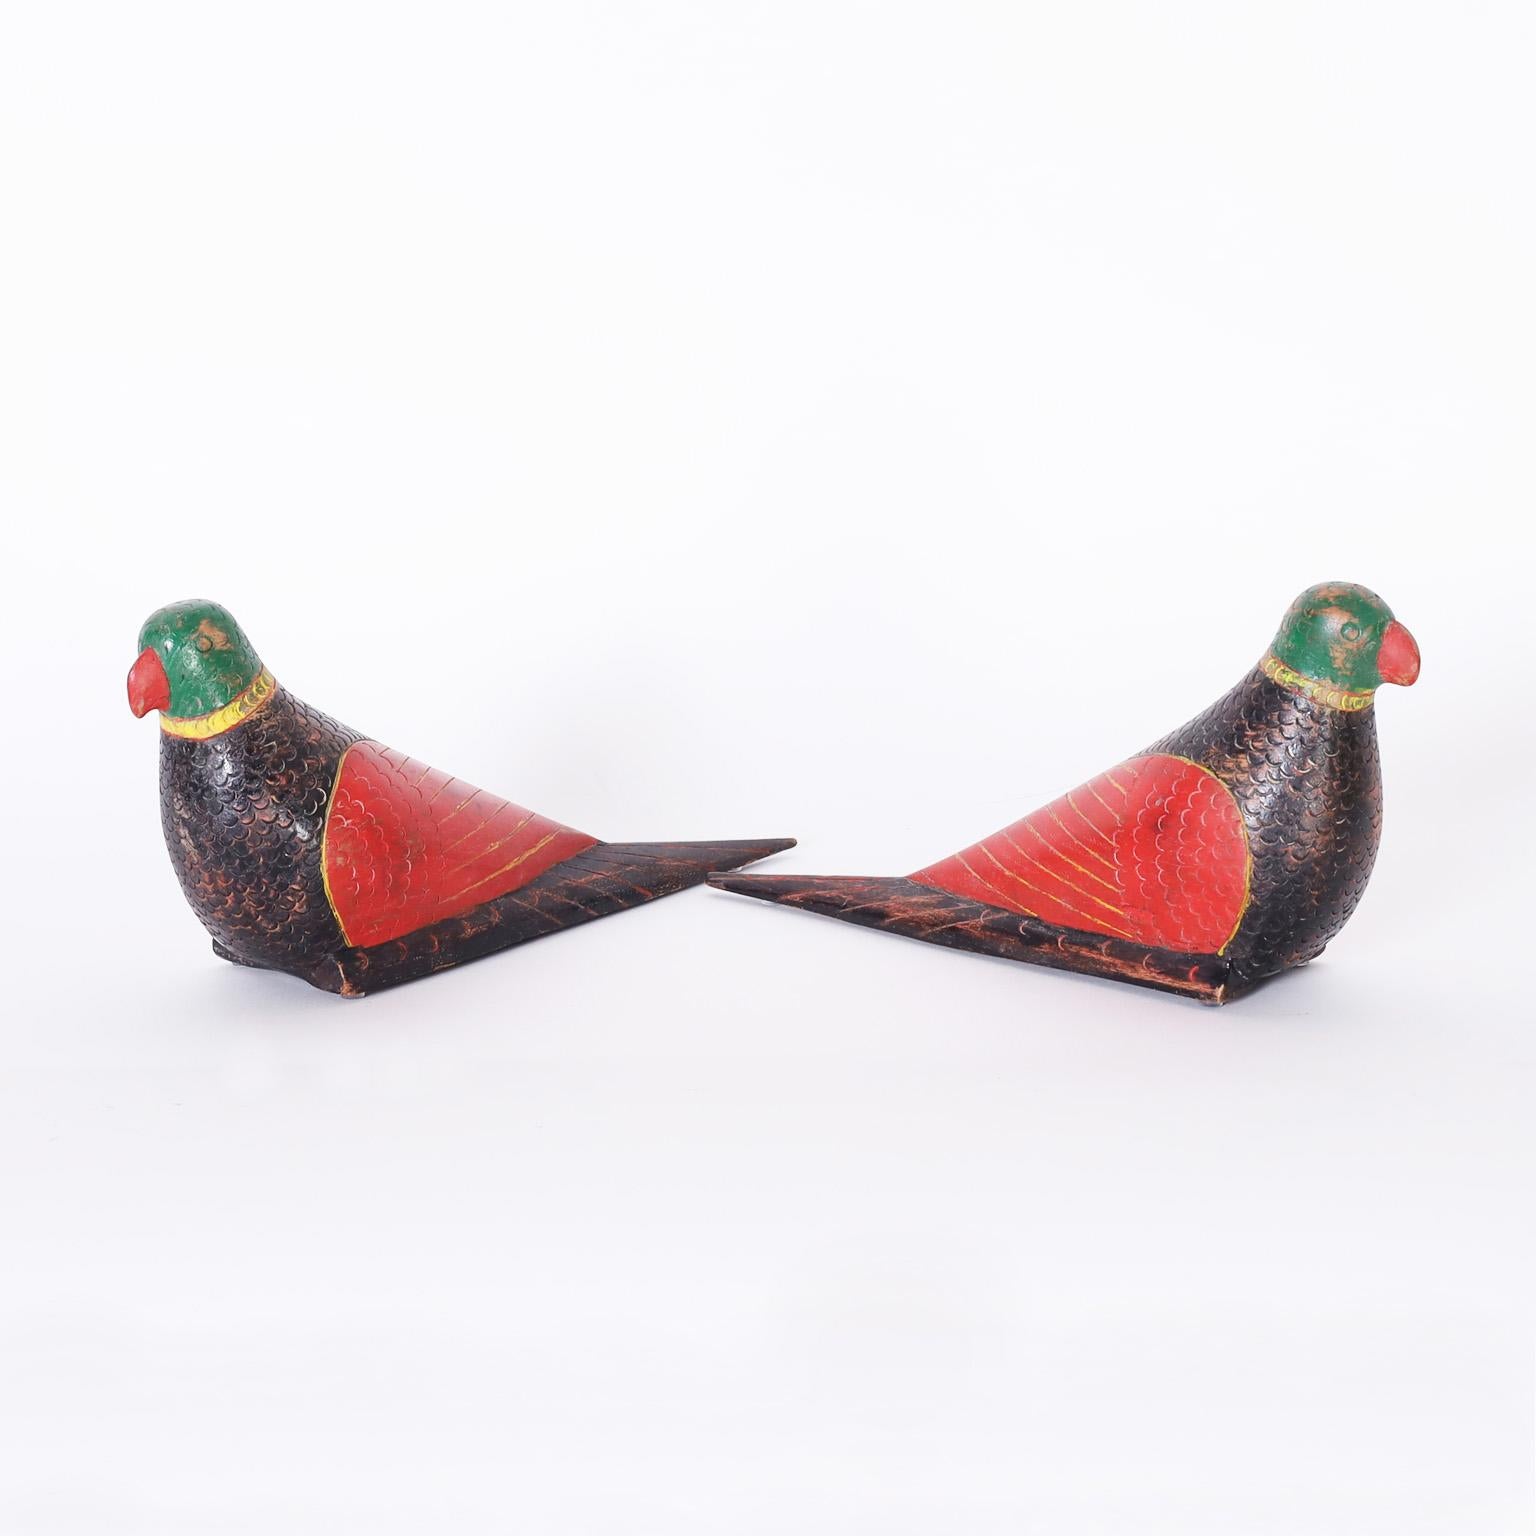 Delightful pair of antique Anglo Indian parrots hand carved from indigenous hardwood and painted in a naive folk style now worn to perfection.